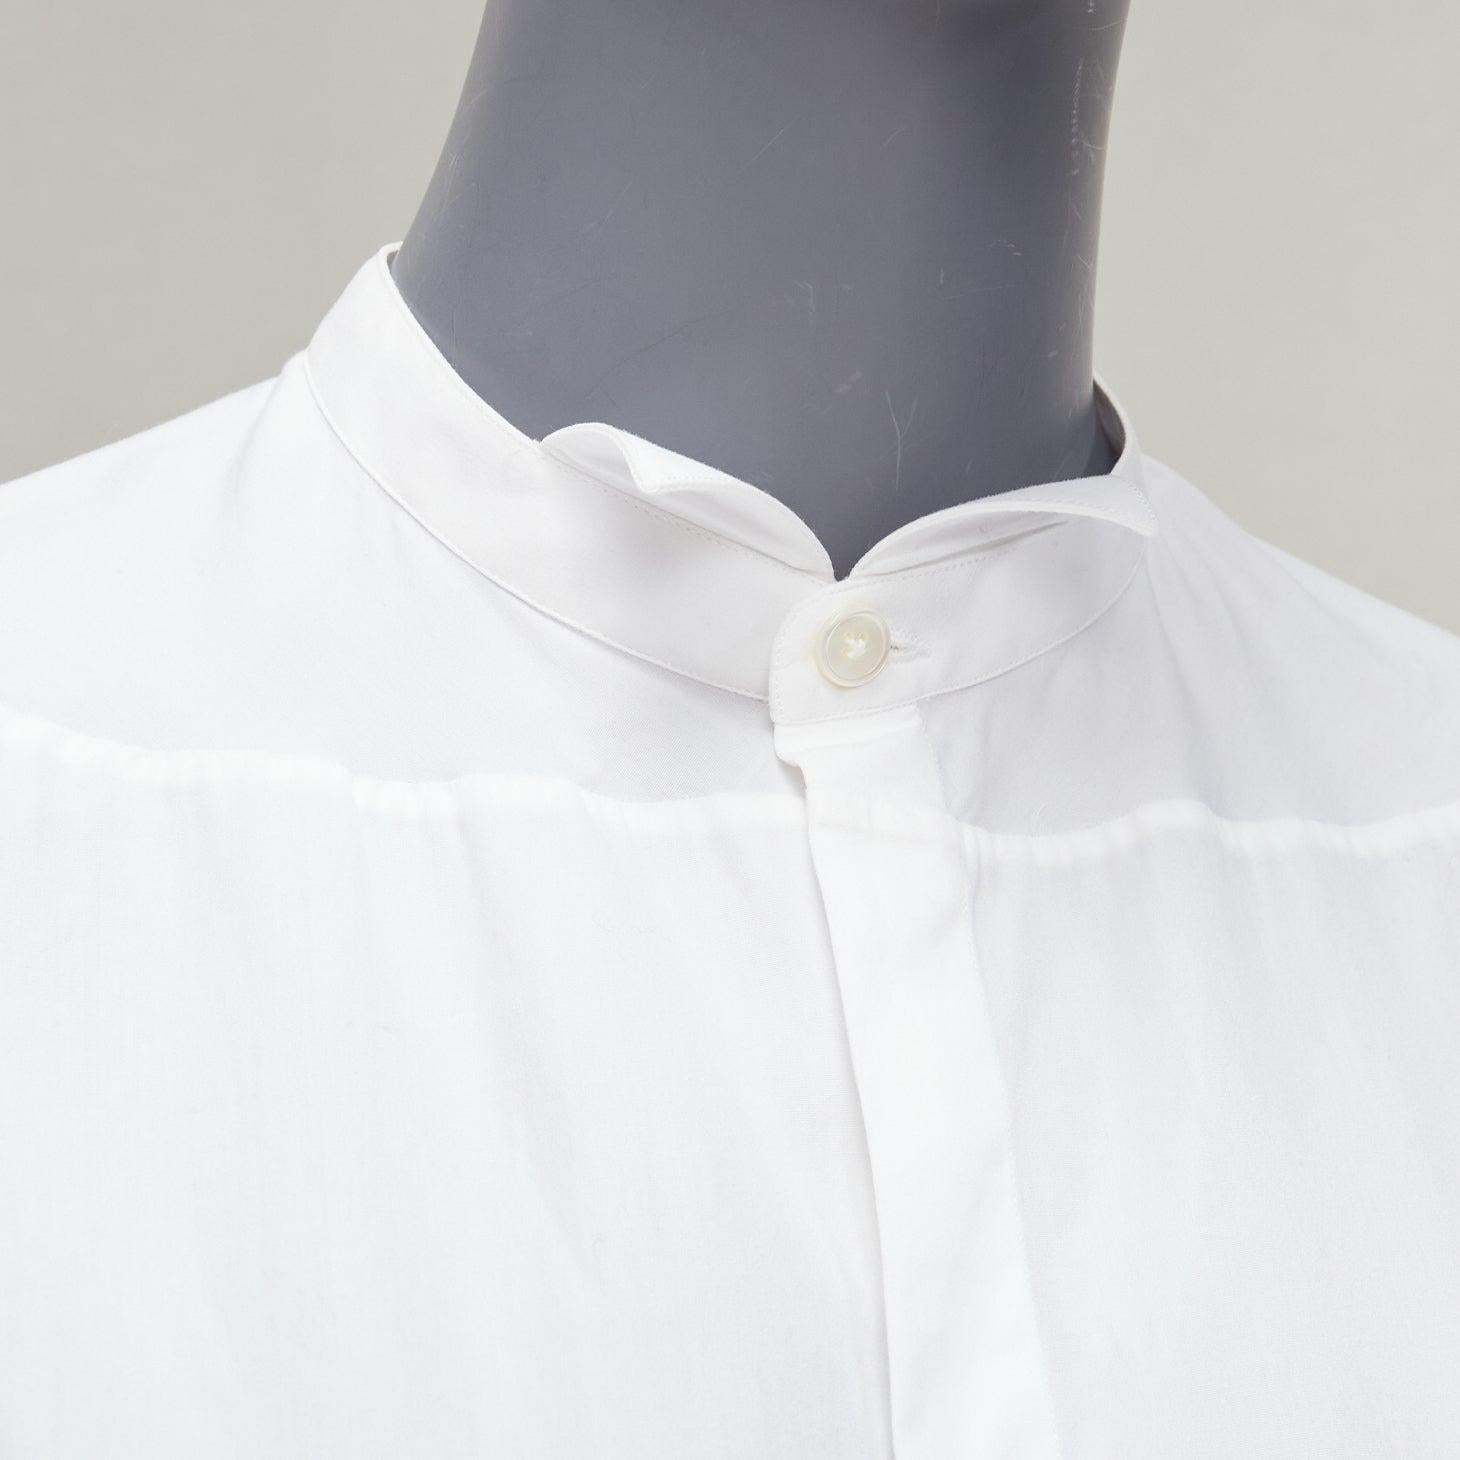 LANVIN white 100% cotton bow tie collar plain dress shirt EU37 XS
Reference: CNLE/A00296
Brand: Lanvin
Designer: Alber Elbaz
Material: Cotton
Color: White
Pattern: Solid
Closure: Button
Extra Details: Pointy collar.
Made in: